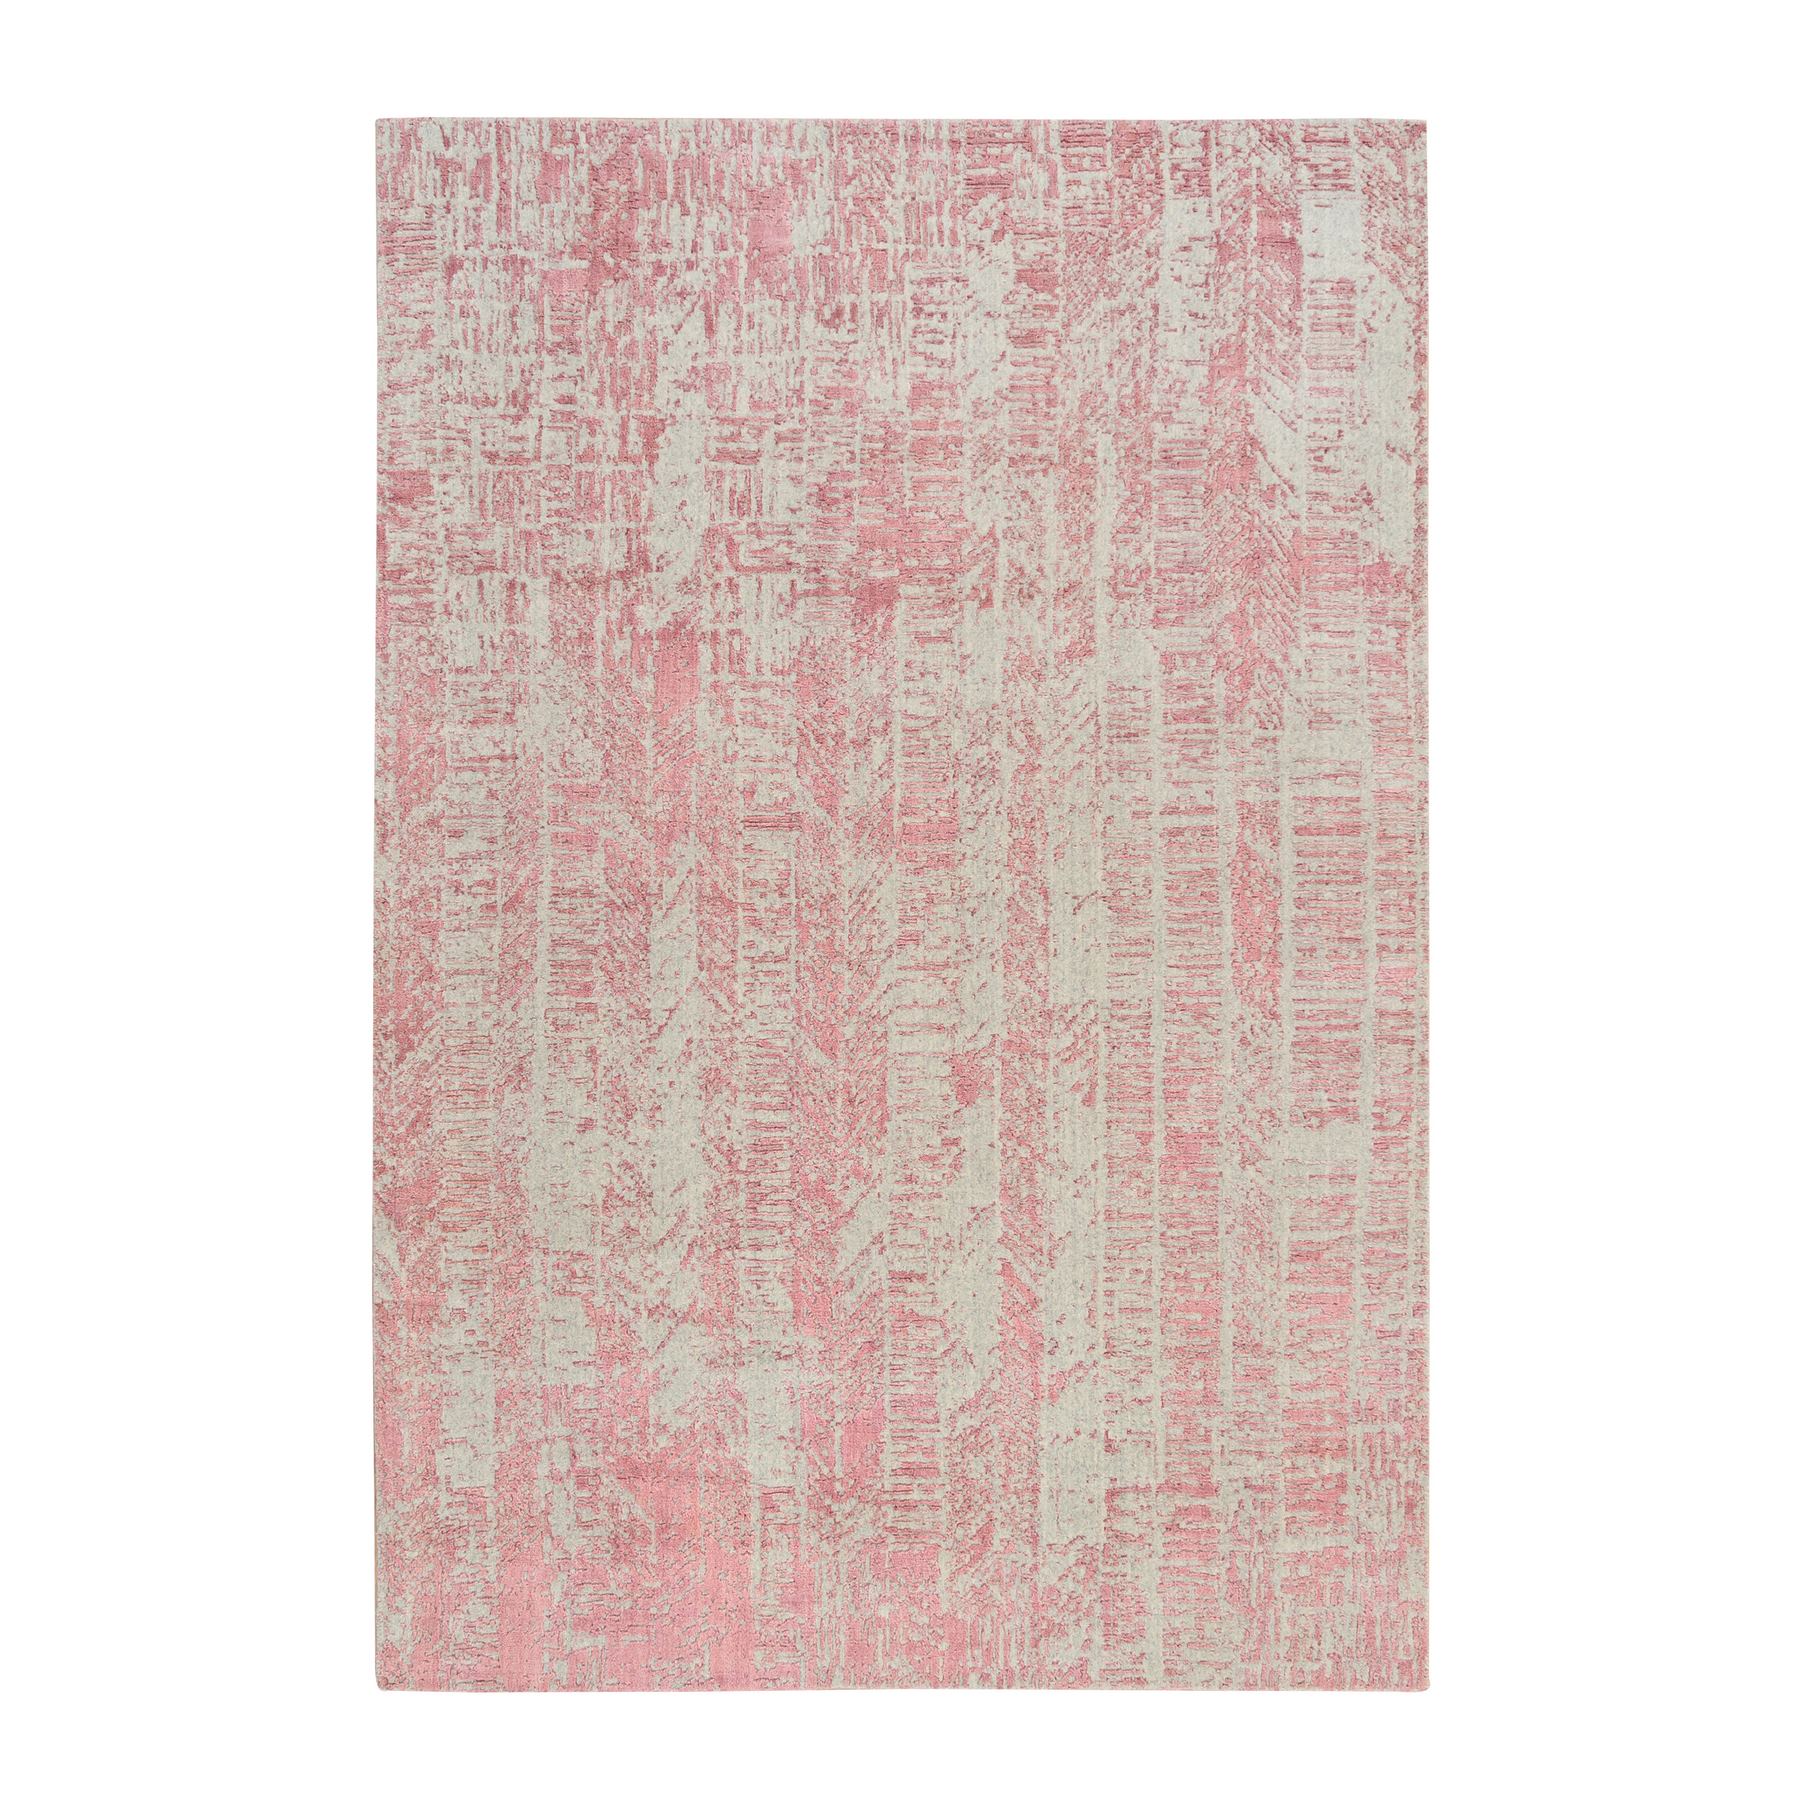 6'x9'1" Rose Pink, Wool and Art Silk Jacquard Hand Loomed, All Over Design, Oriental Rug 